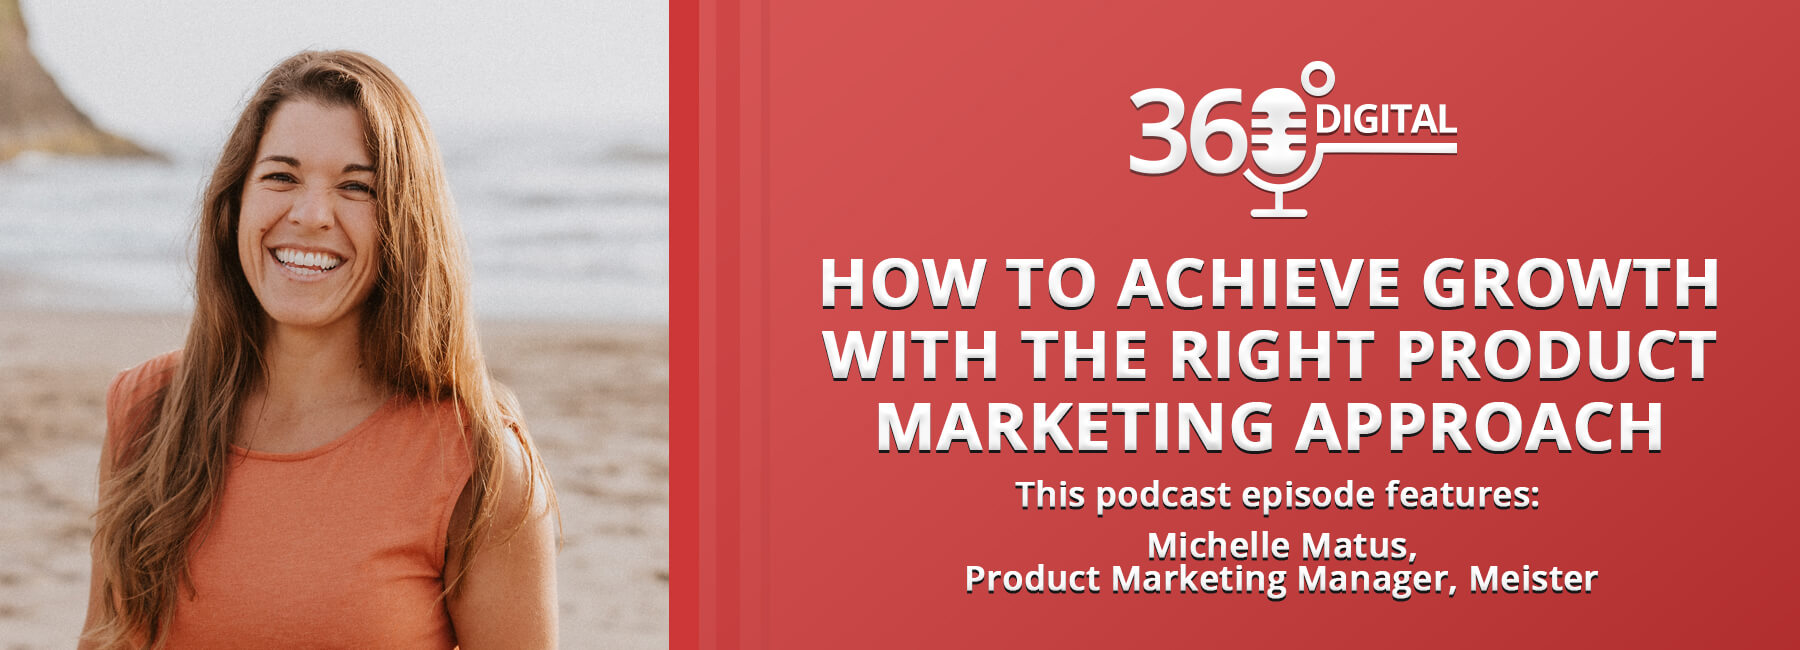 360 Digital podcast with Michelle Matus